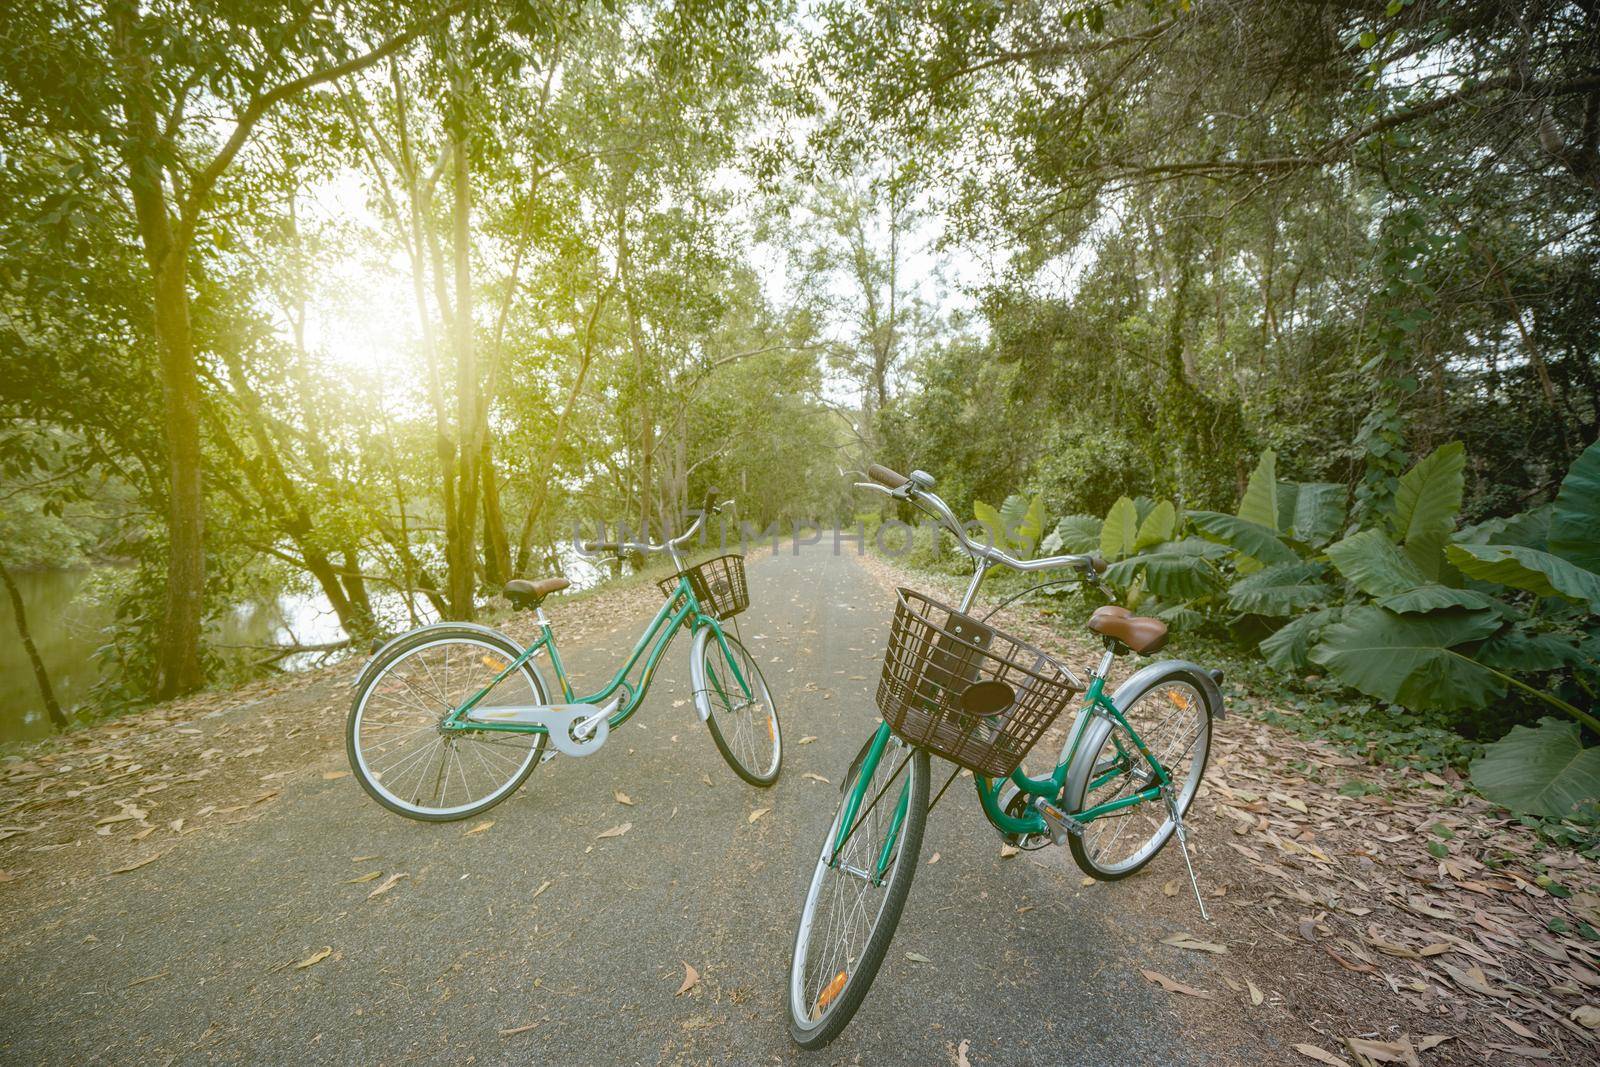 A bicycle on road with sunlight and green tree in park outdoor. by sirawit99